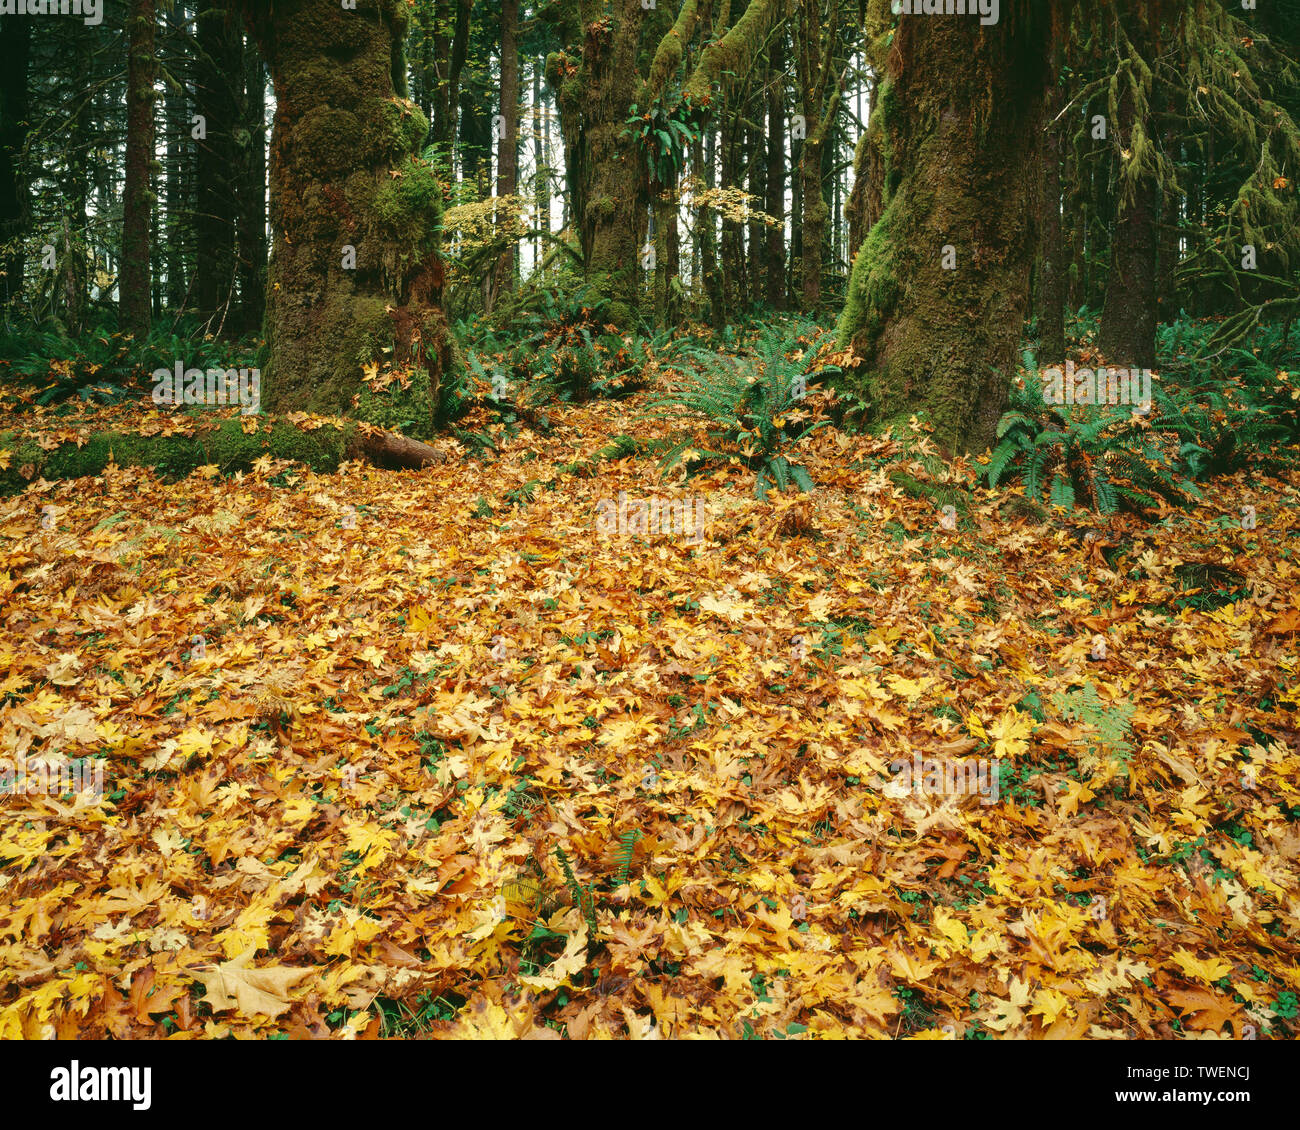 USA, Washington, Olympic National Park, Moss laden bigleaf maples and understory of ferns and fallen leaves in autumn; Queets Rain Forest. Stock Photo